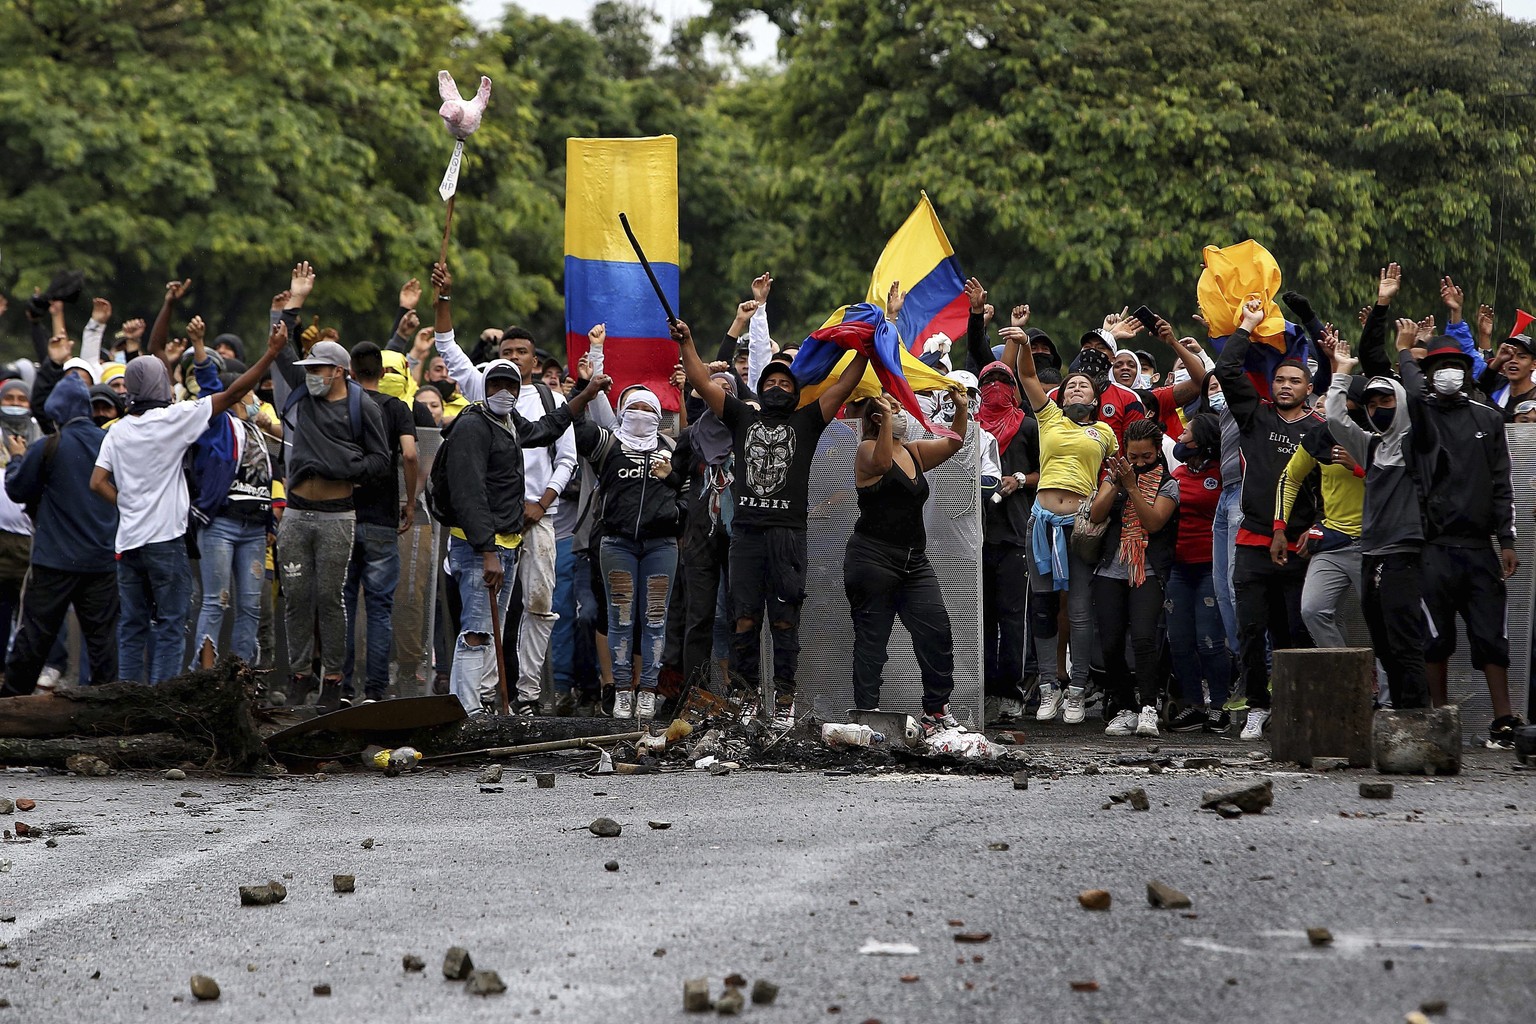 Protesters chant anti-government slogans during a national strike to protest government-proposed tax reform, in Cali, Colombia, Friday, April 30, 2021. (AP Photo/Andres Gonzalez)